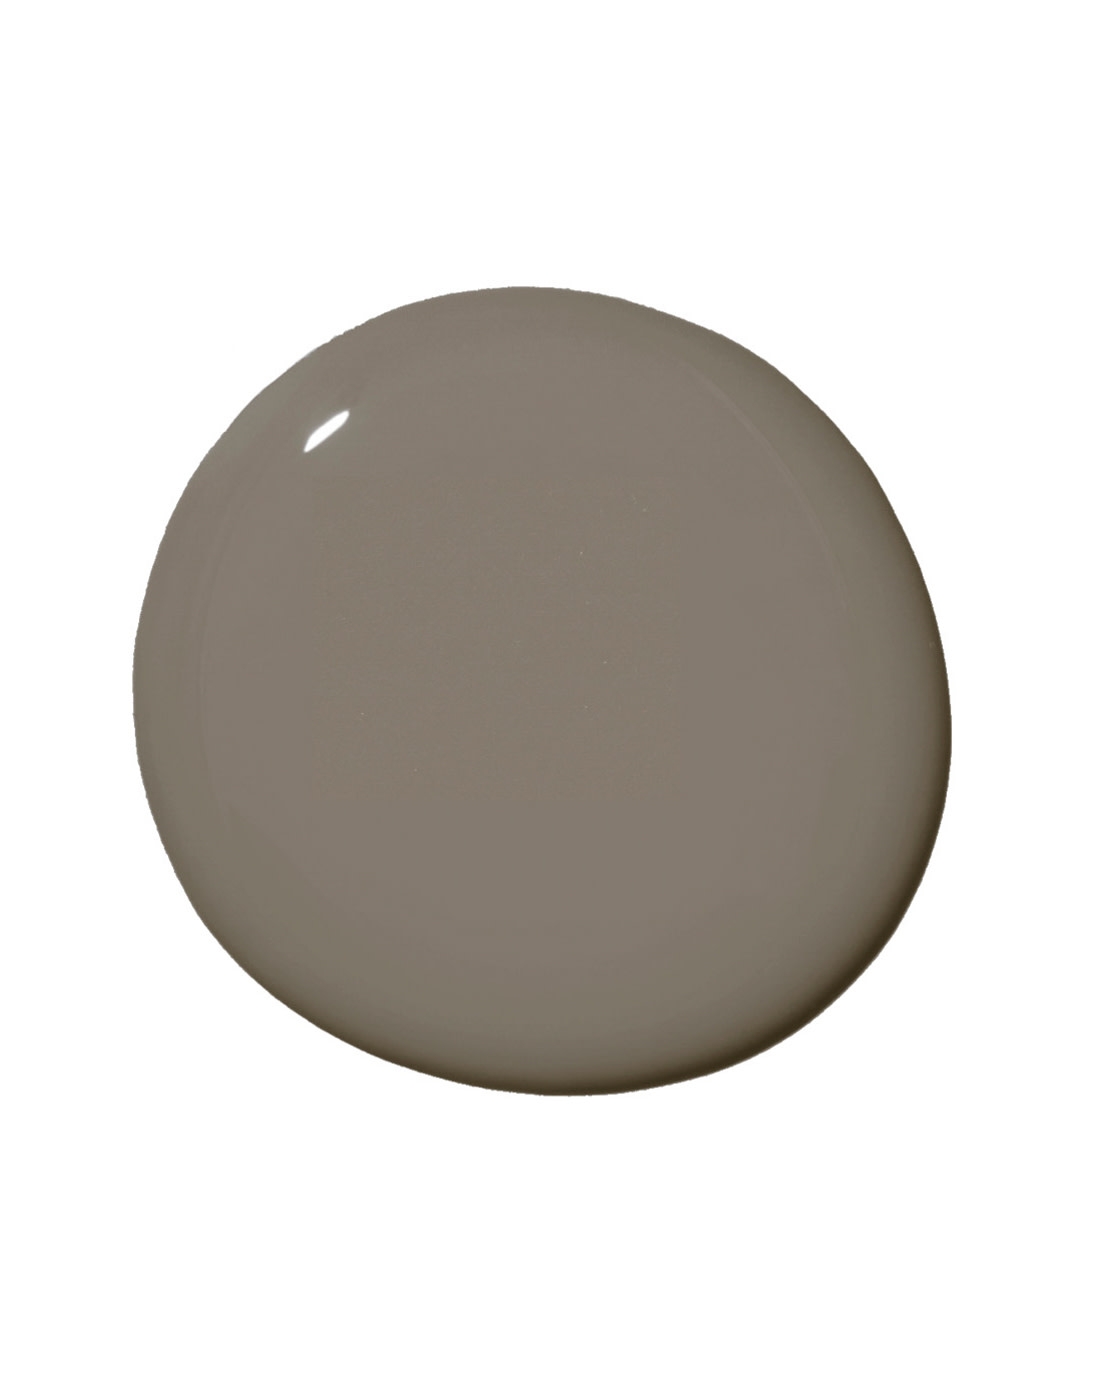 Clare Paint - Dirty Chai - Wall Swatch - Image 0